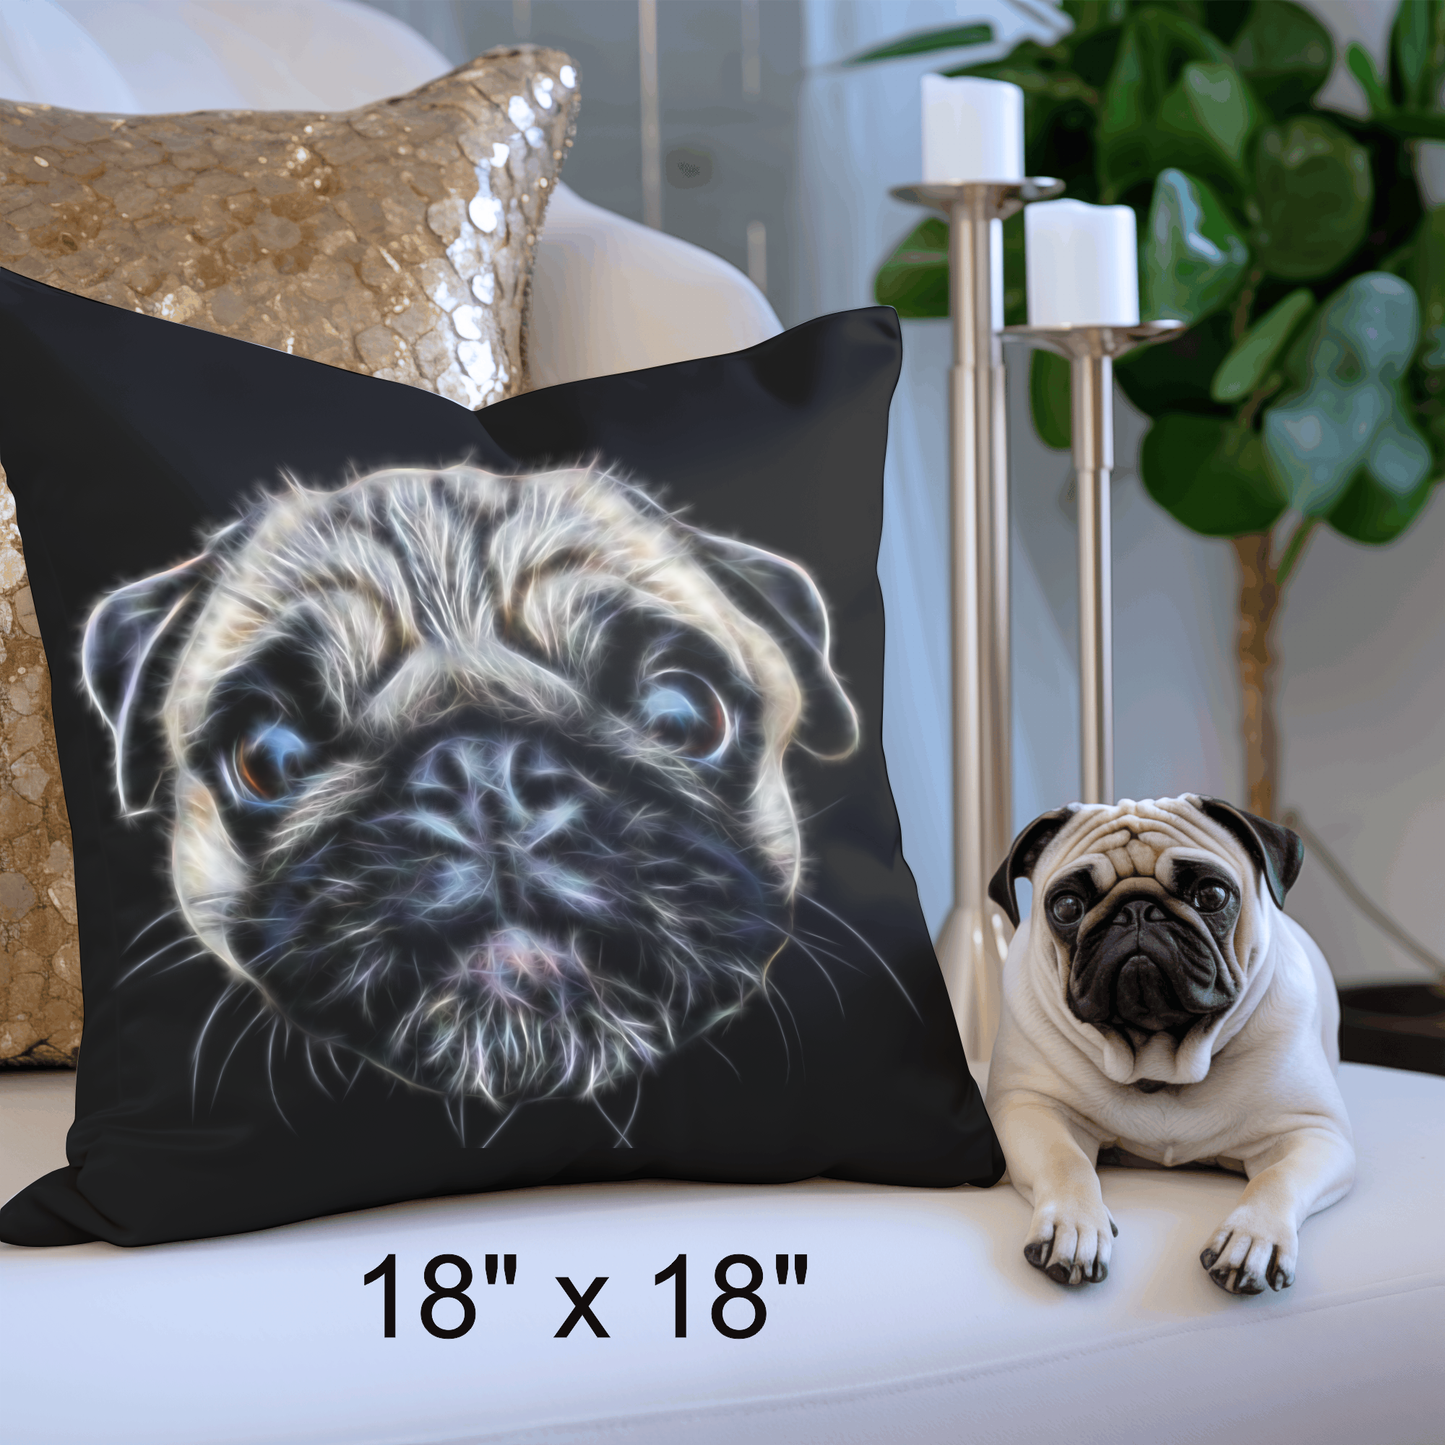 Black Labradoodle Cushion with Pillow Insert